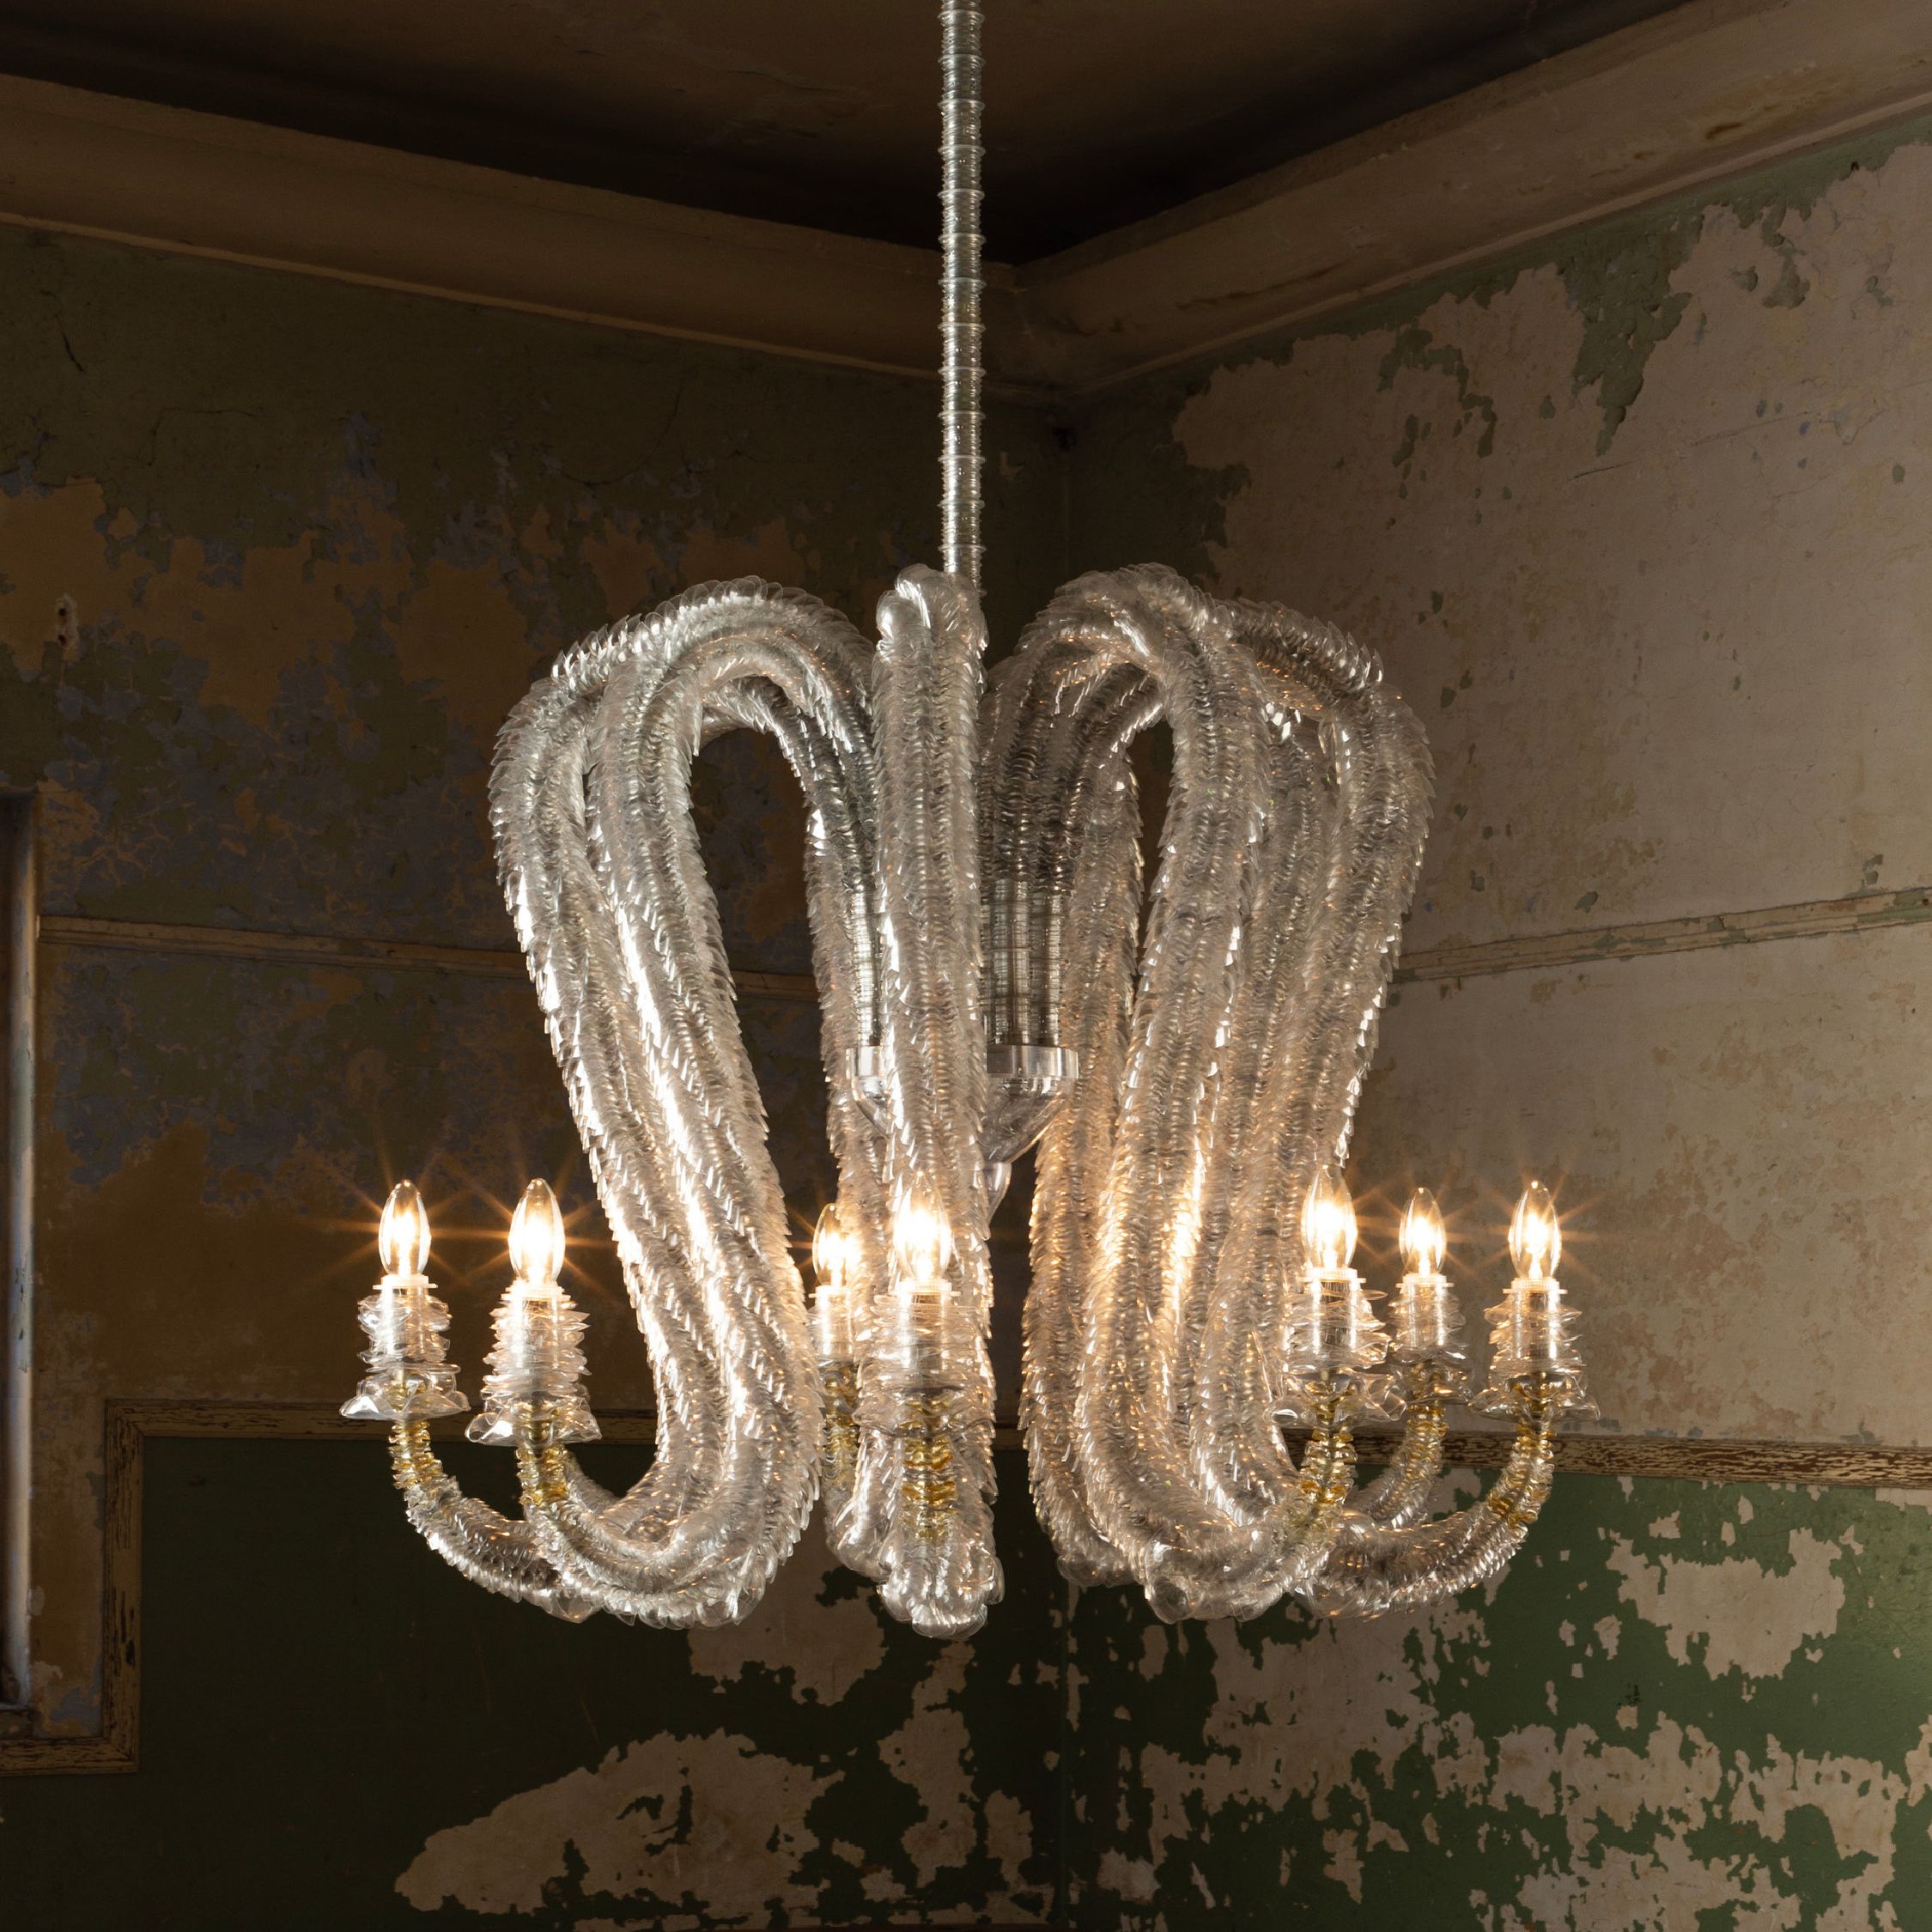 Thierry Jeannot OCTOmut Chandelier courtesy ammann gallery